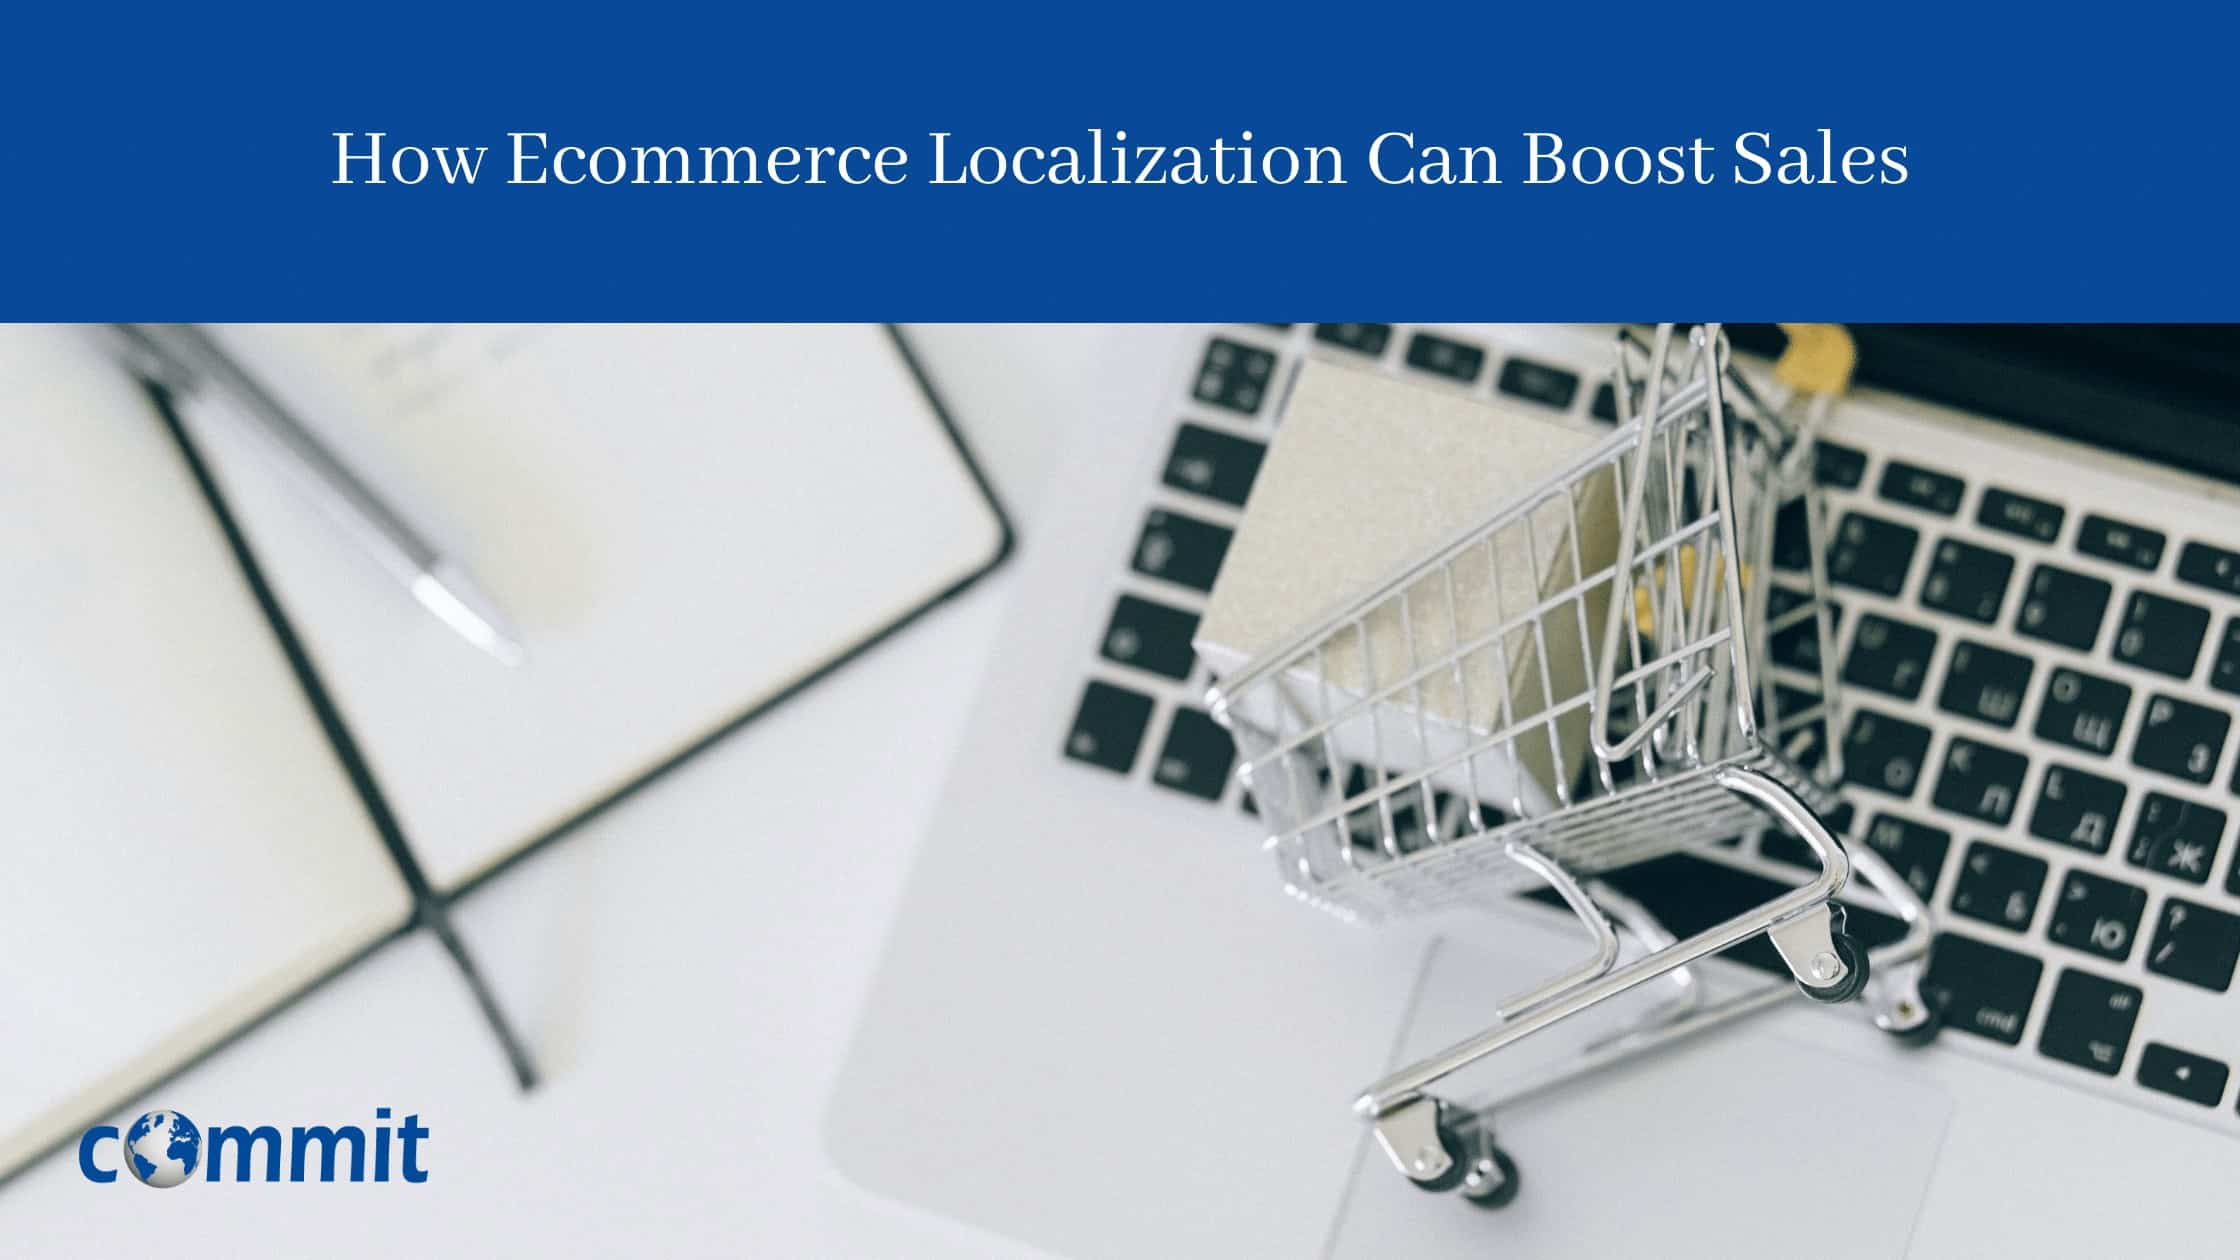 How Ecommerce Localization Can Boost Sales (1)